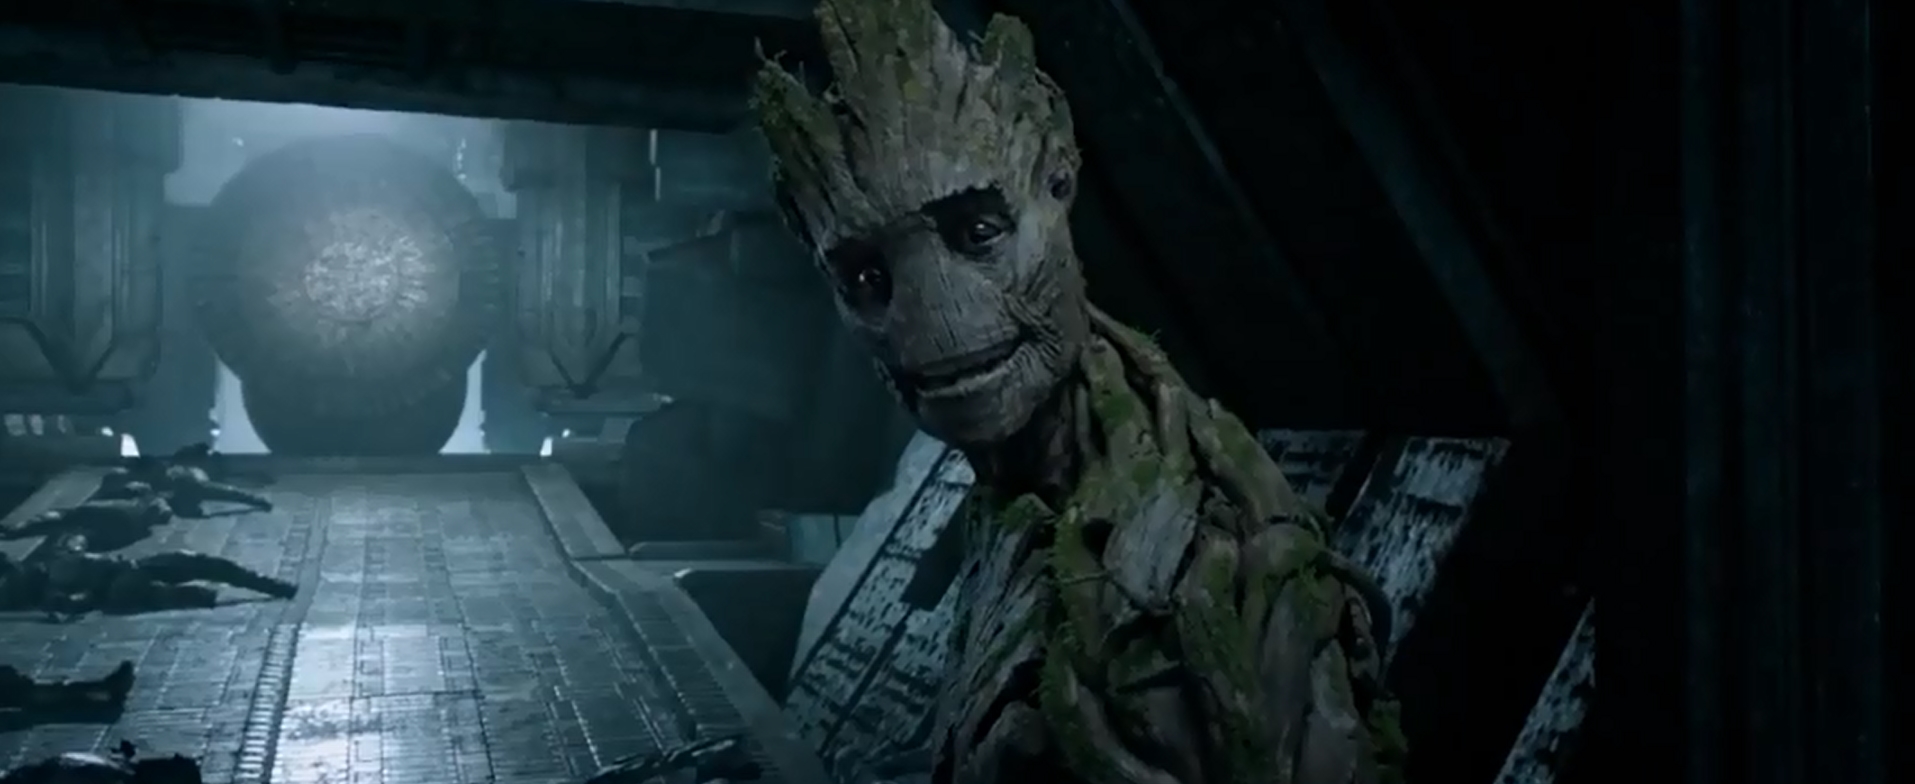 Loved The Way Groot S Face Lit Up When He Smiled Was Priceless